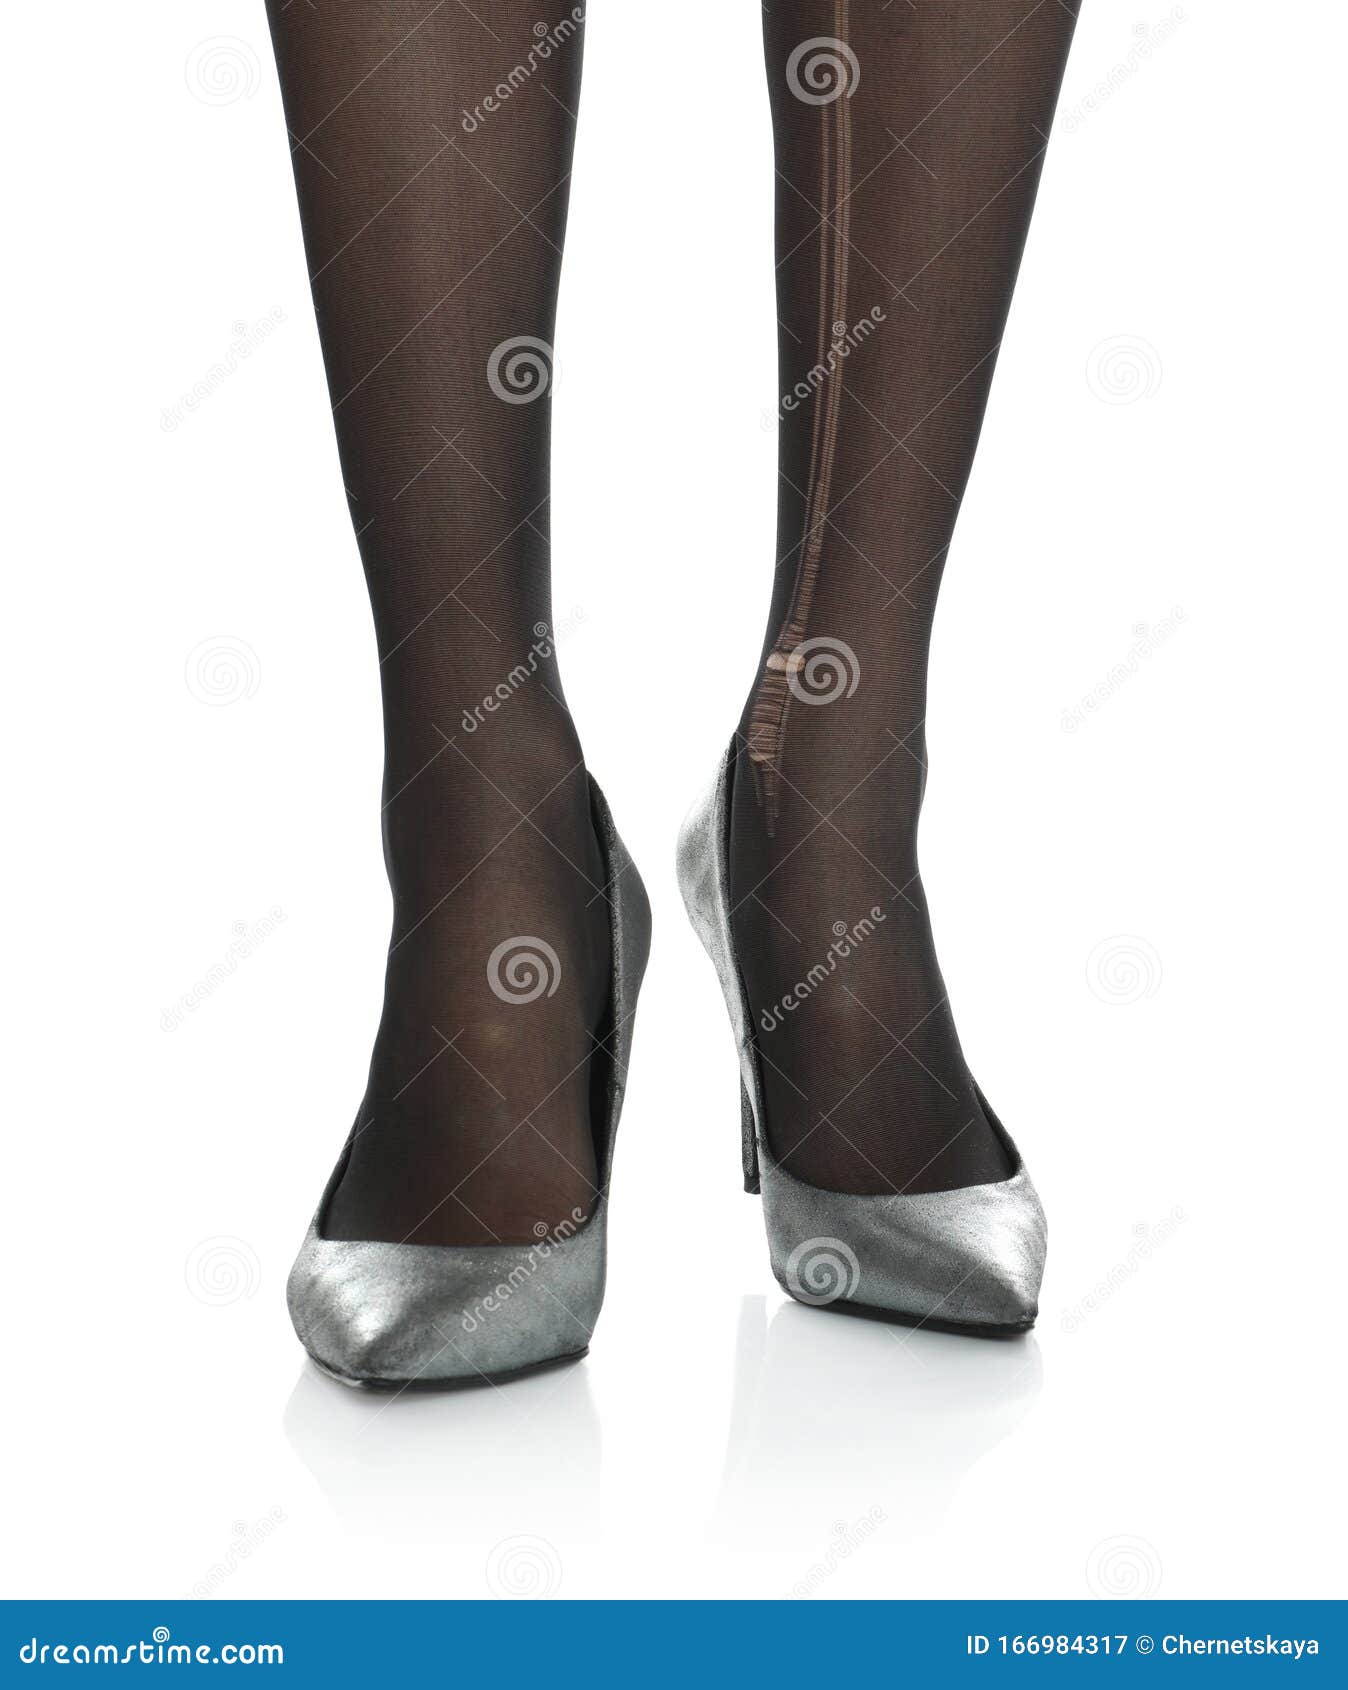 Woman Wearing Torn Tights On White Background Stock Image - Image of ...